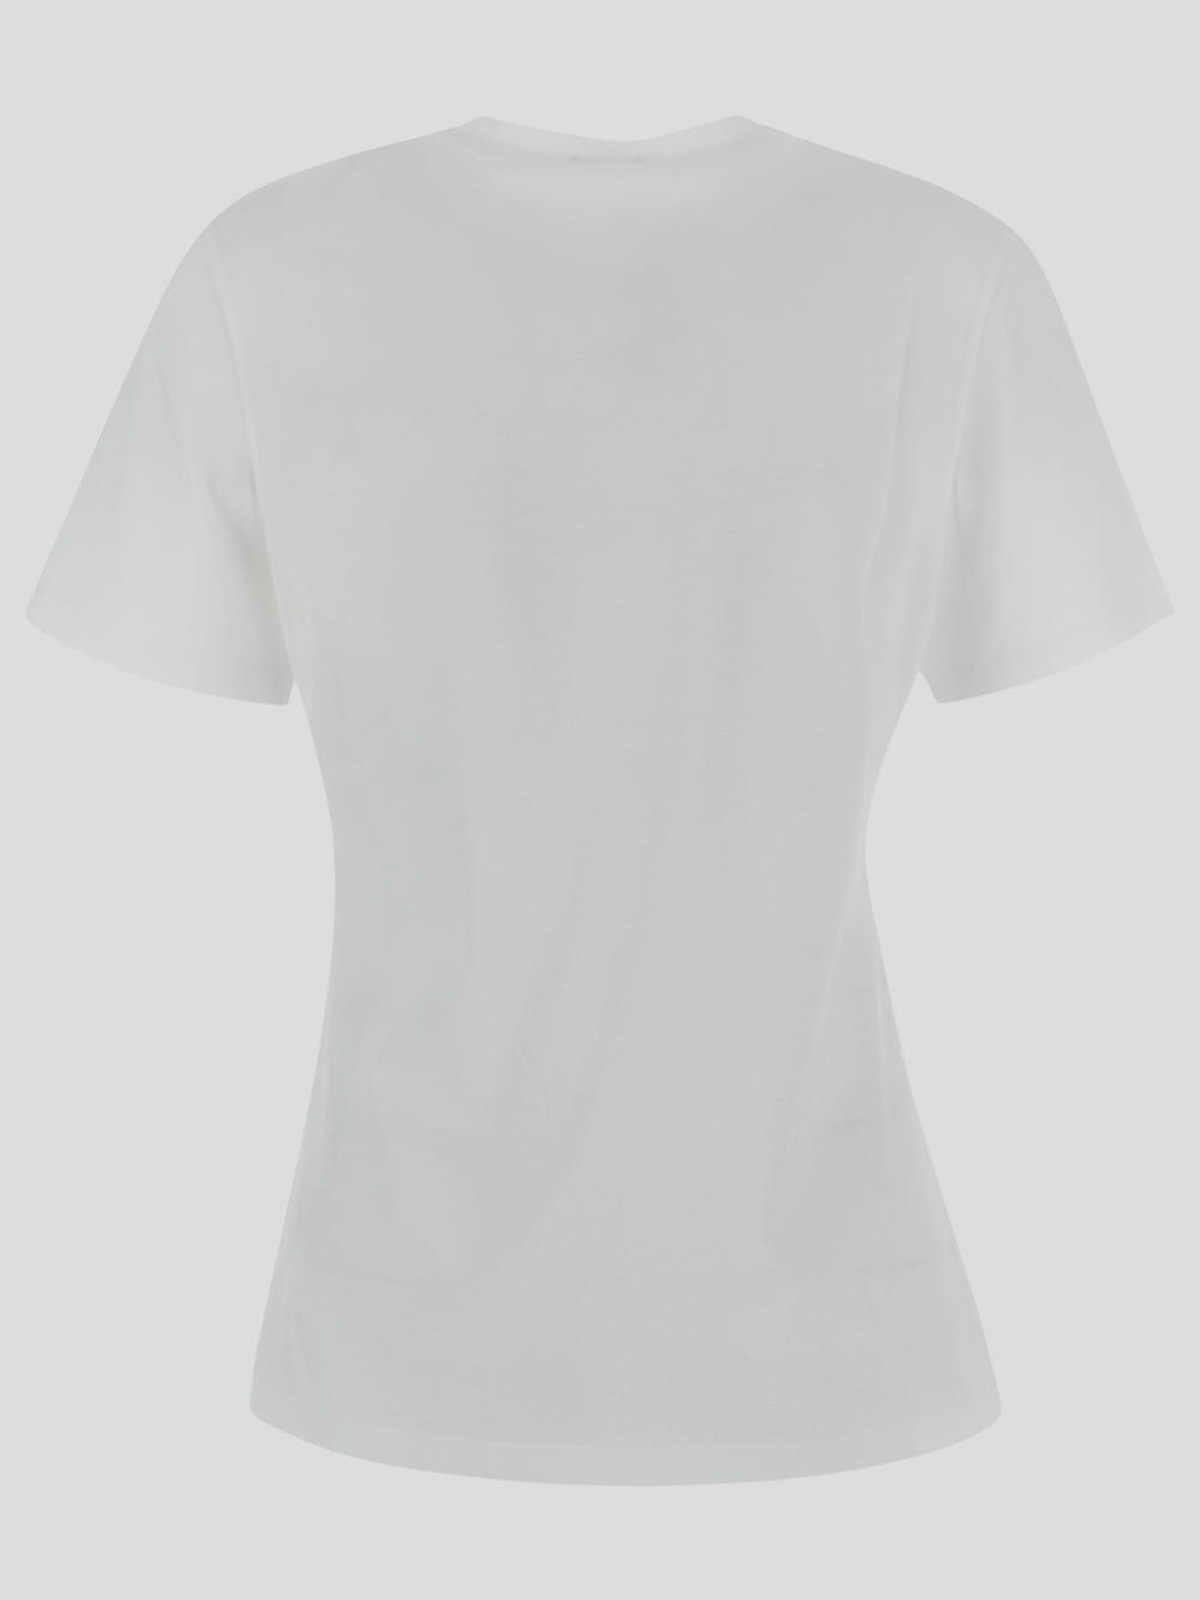 Shop Versace T-shirt With Short Sleeves In White